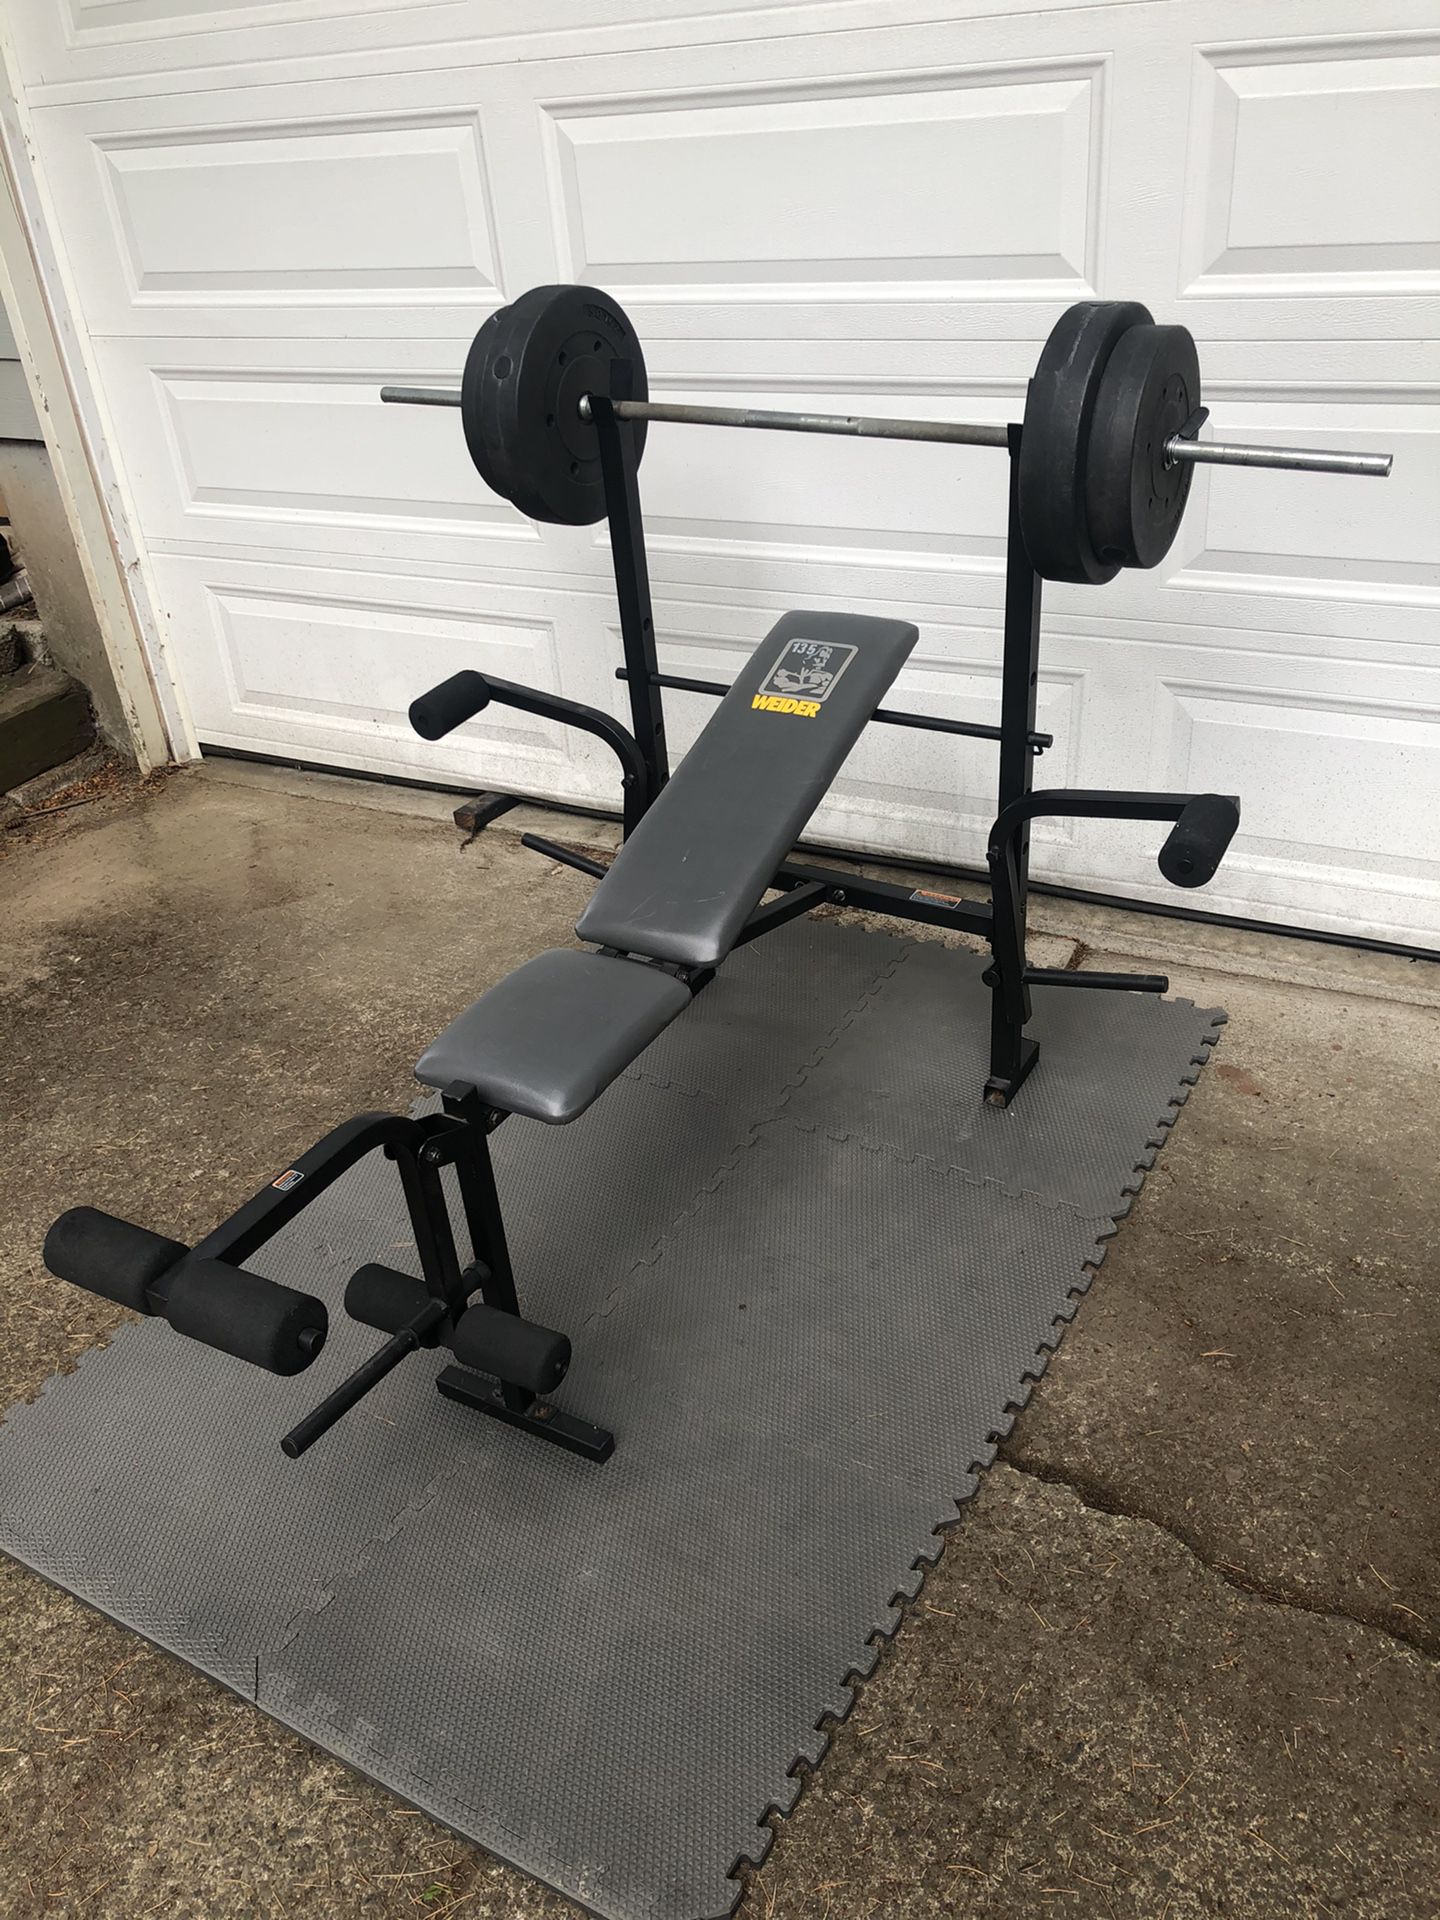 Adjustable Weightbench with 80lbs